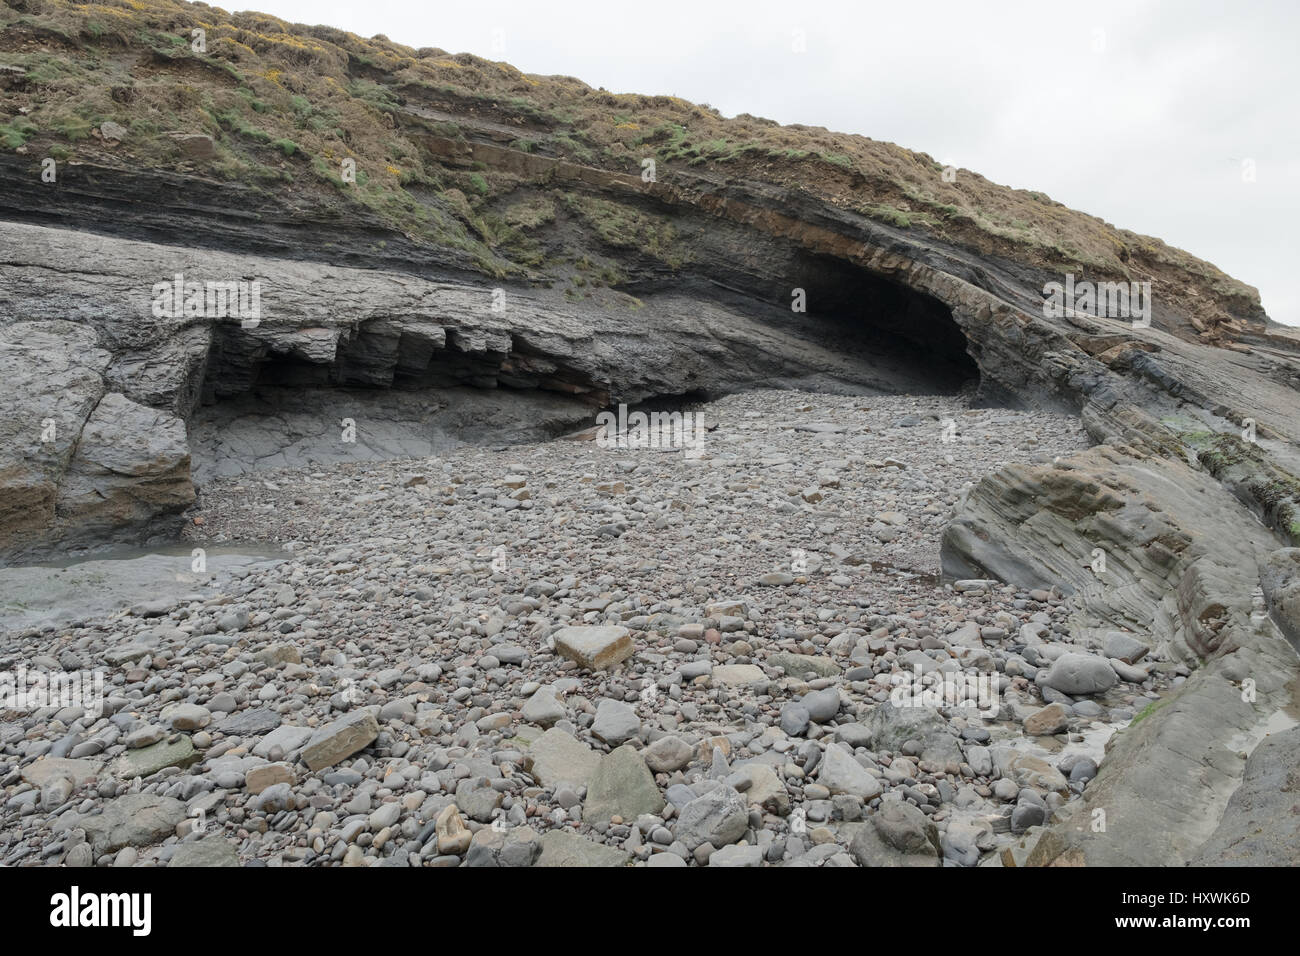 Geological fold with barnacle laden rocks in foreground at Broadhaven, Pembrokeshire, Wales Stock Photo